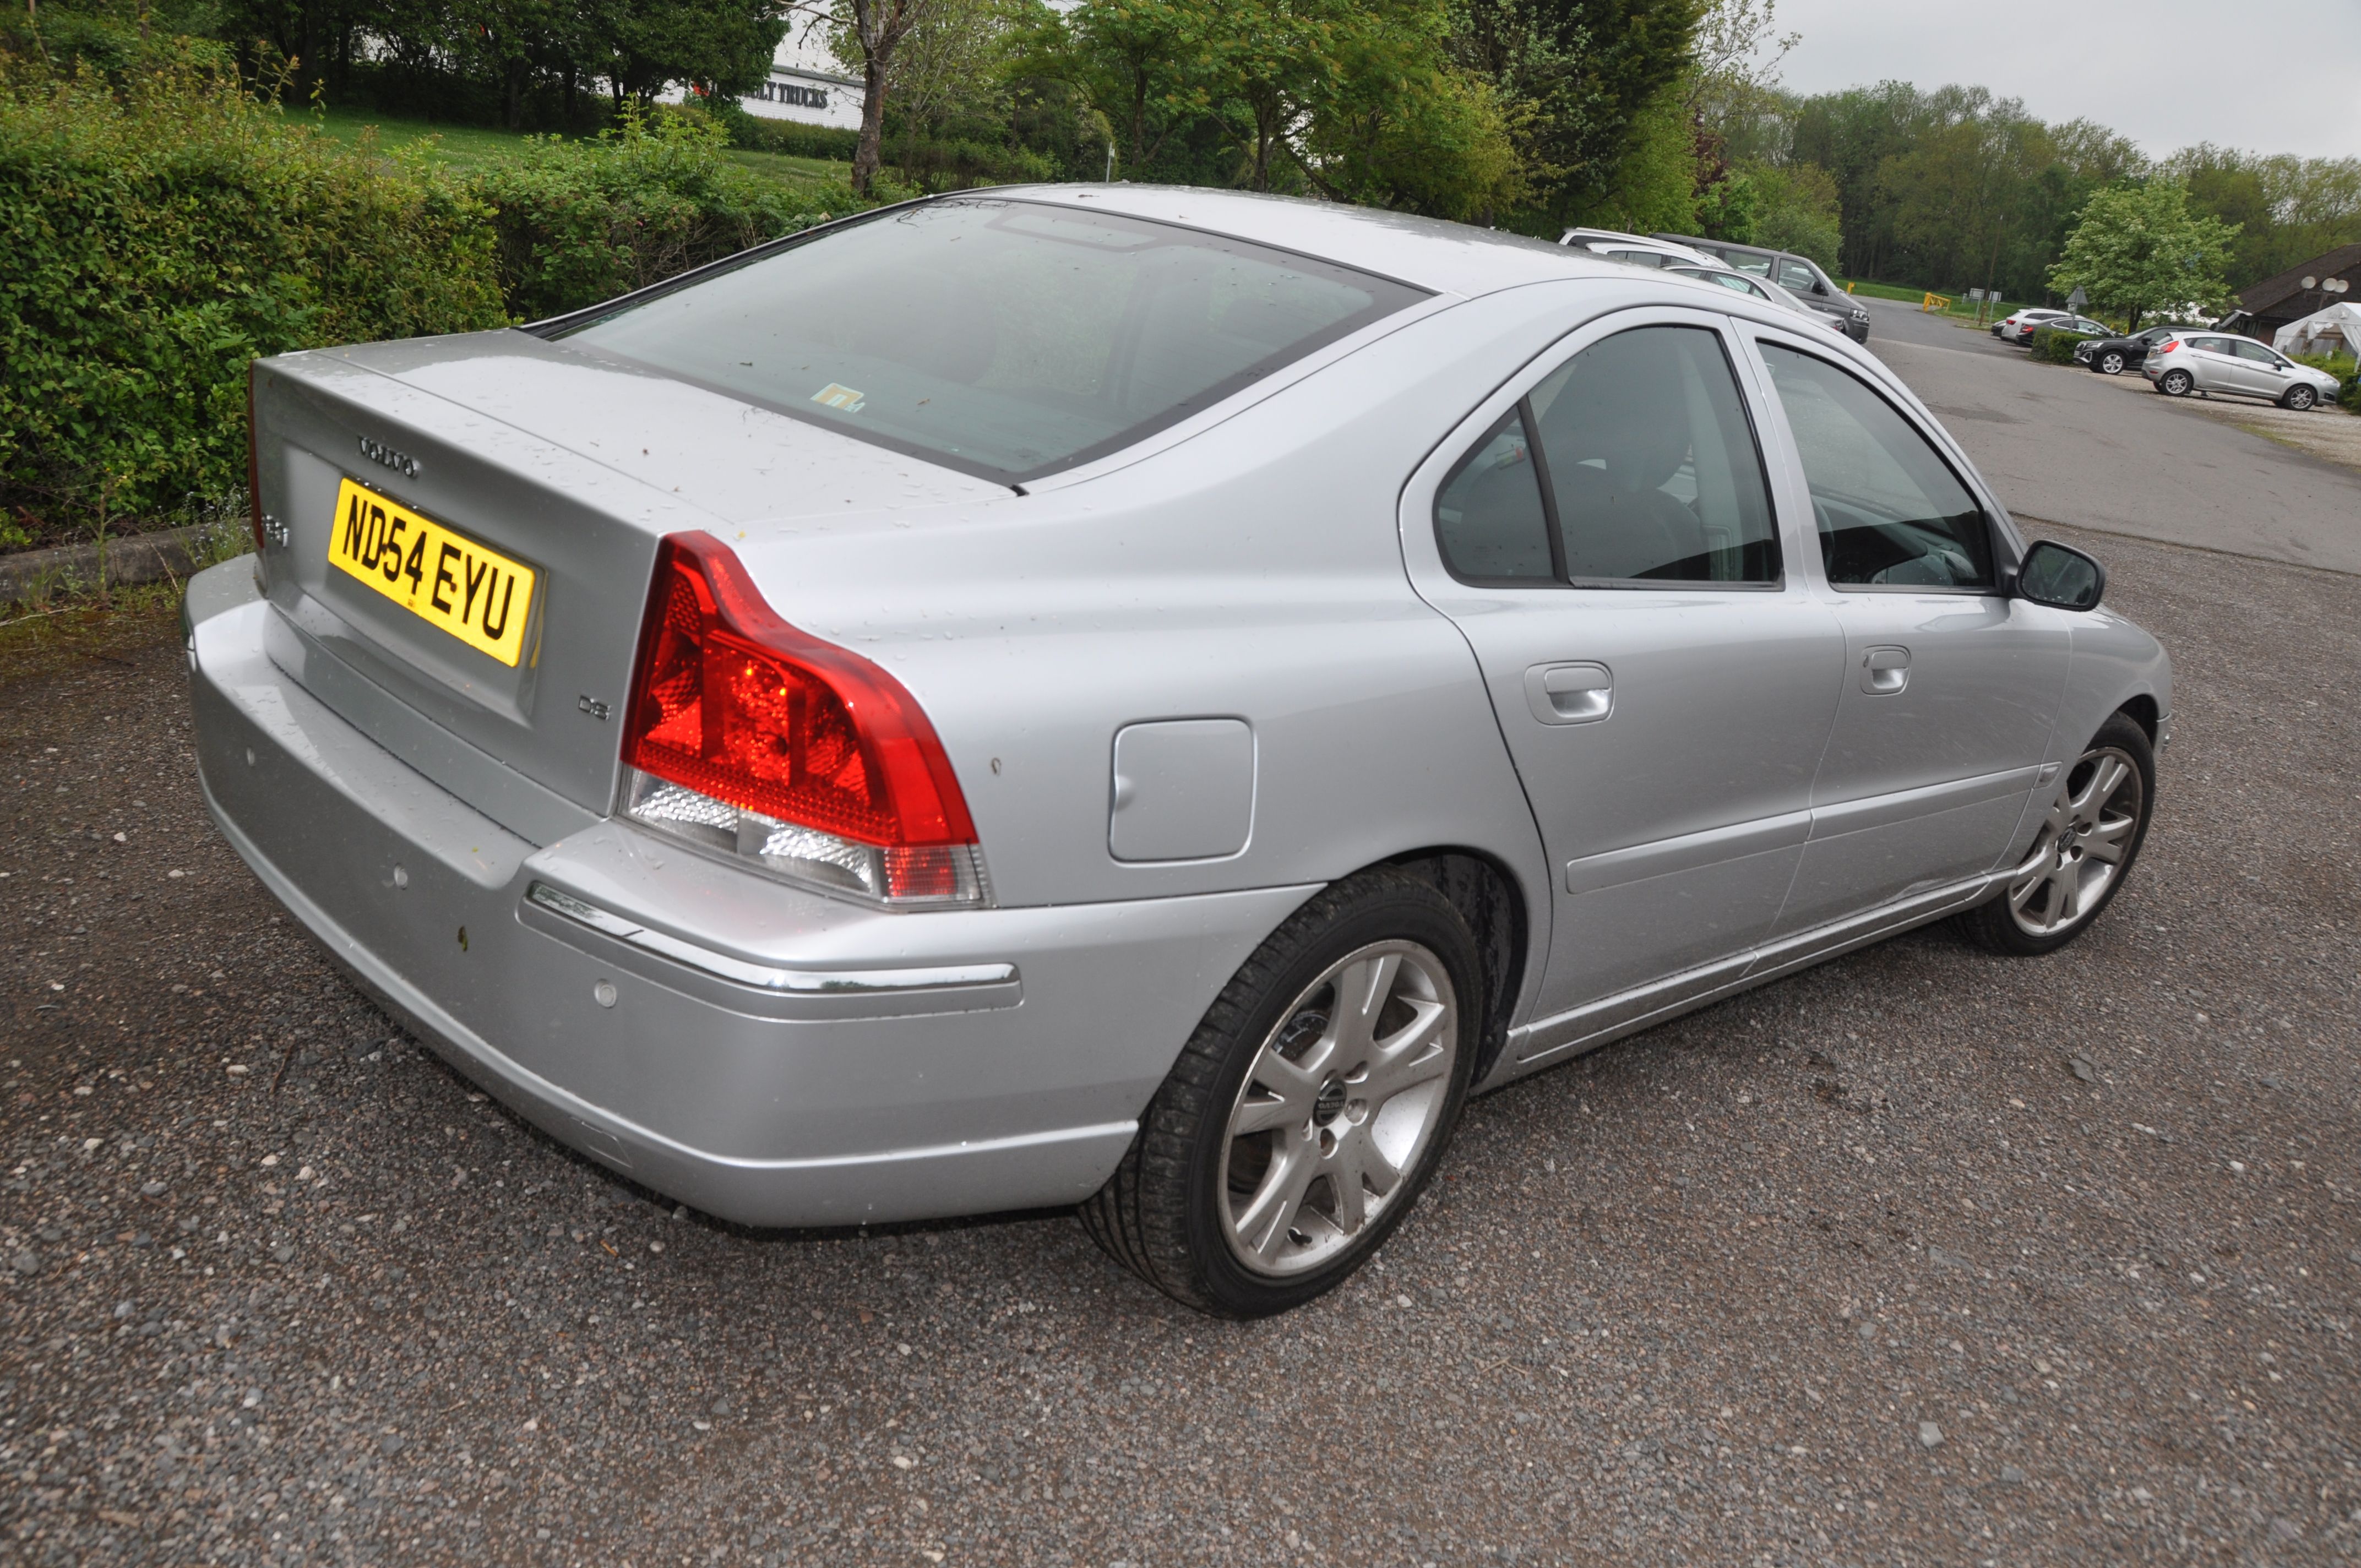 A 2004 VOLVO S60 D5 SE FOUR DOOR SALOON CAR IN SILVER, with a 2401cc diesel engine, 5 speed manual - Image 4 of 16